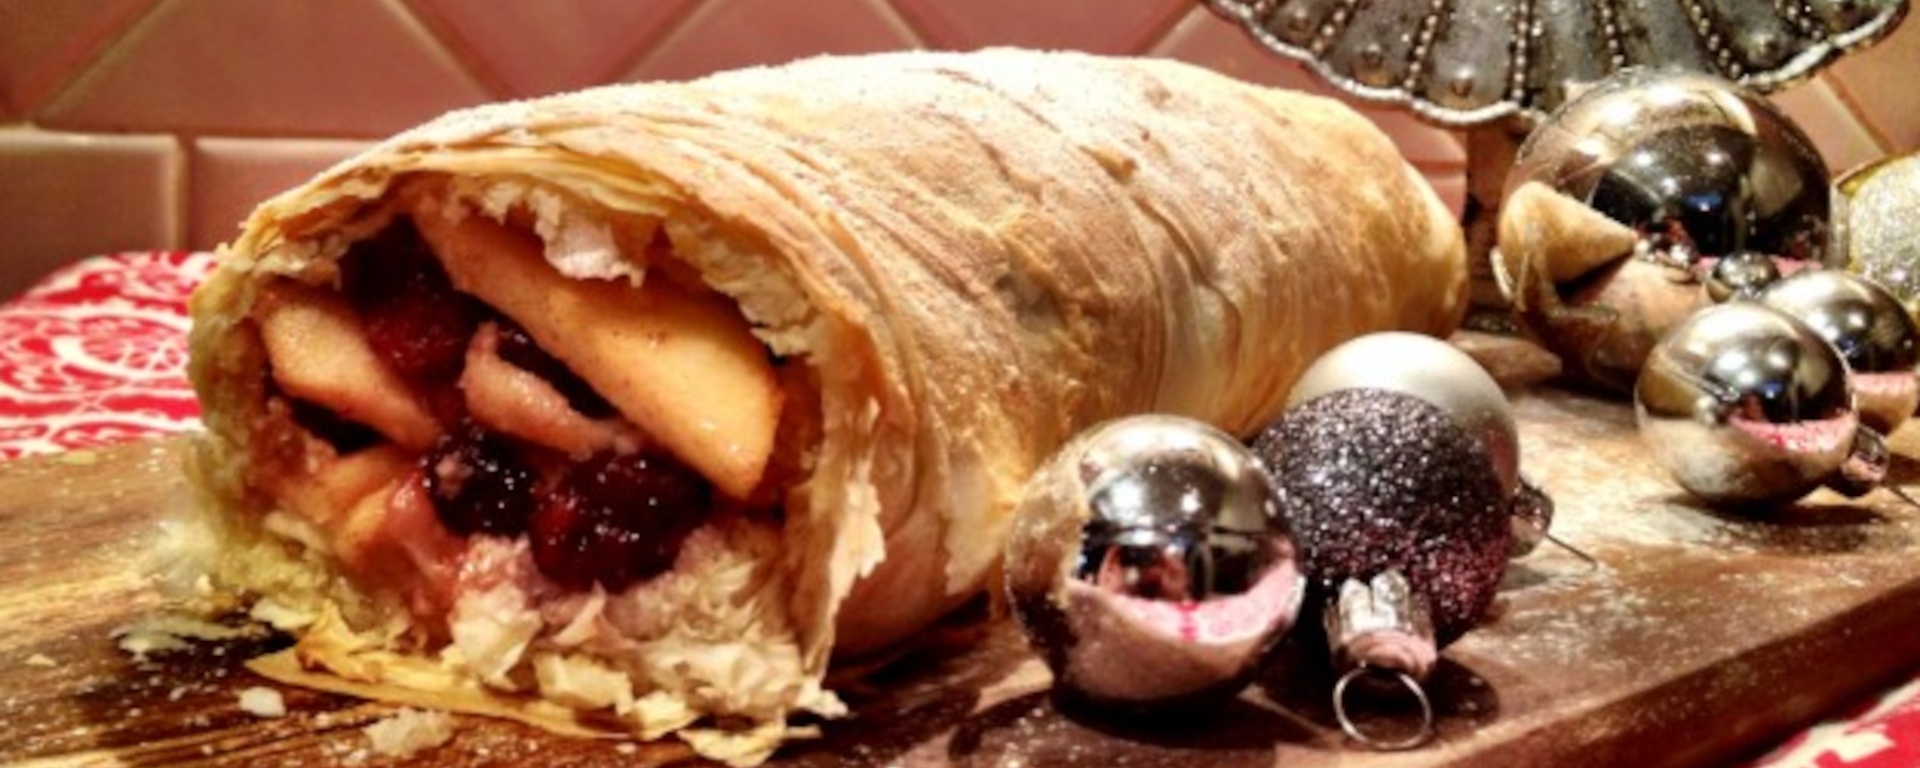 LuvMyRecipe.com - Apples Strawberries and Cranberries Strudel Featured